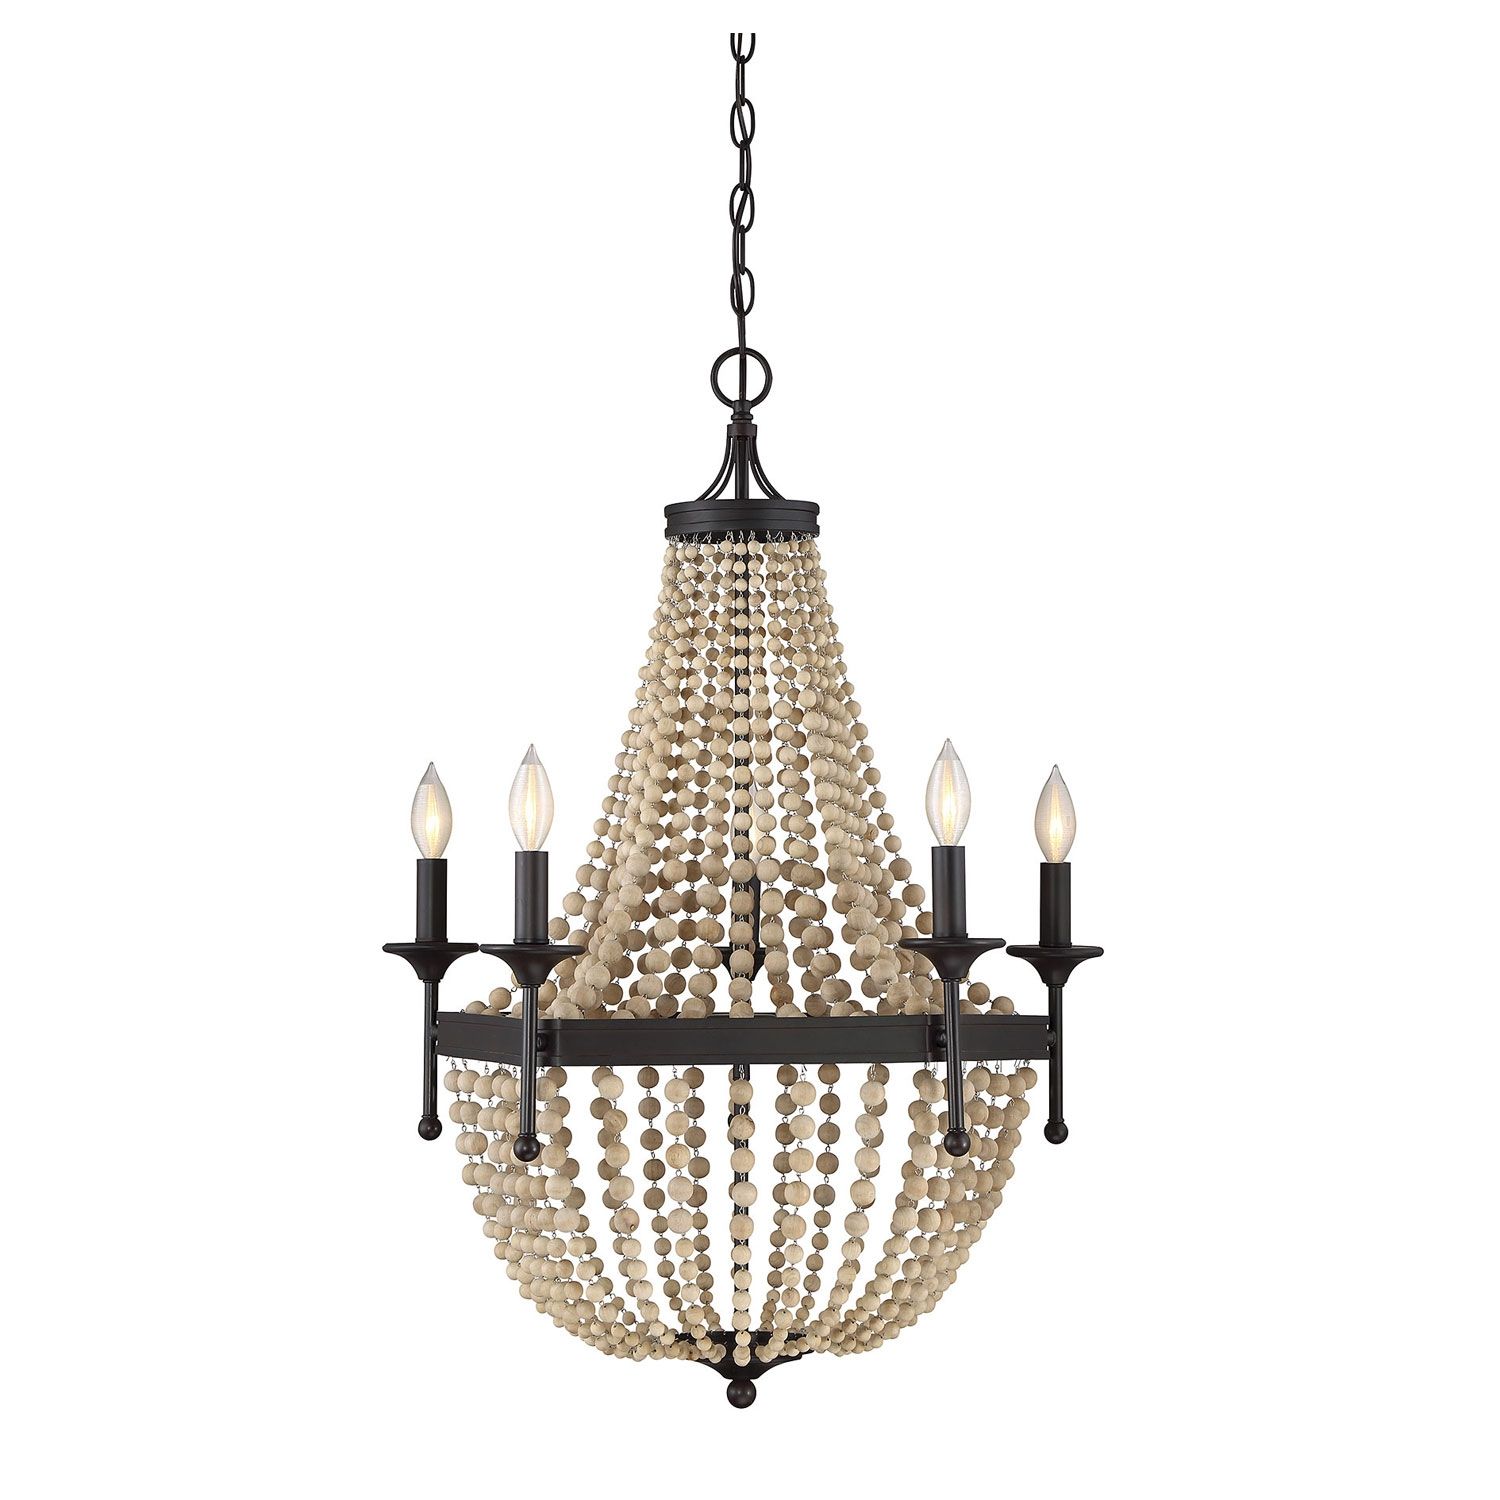 Chandeliers Crystal Modern Iron Shab Chic Country French Inside Ornate Chandeliers (Photo 3 of 12)